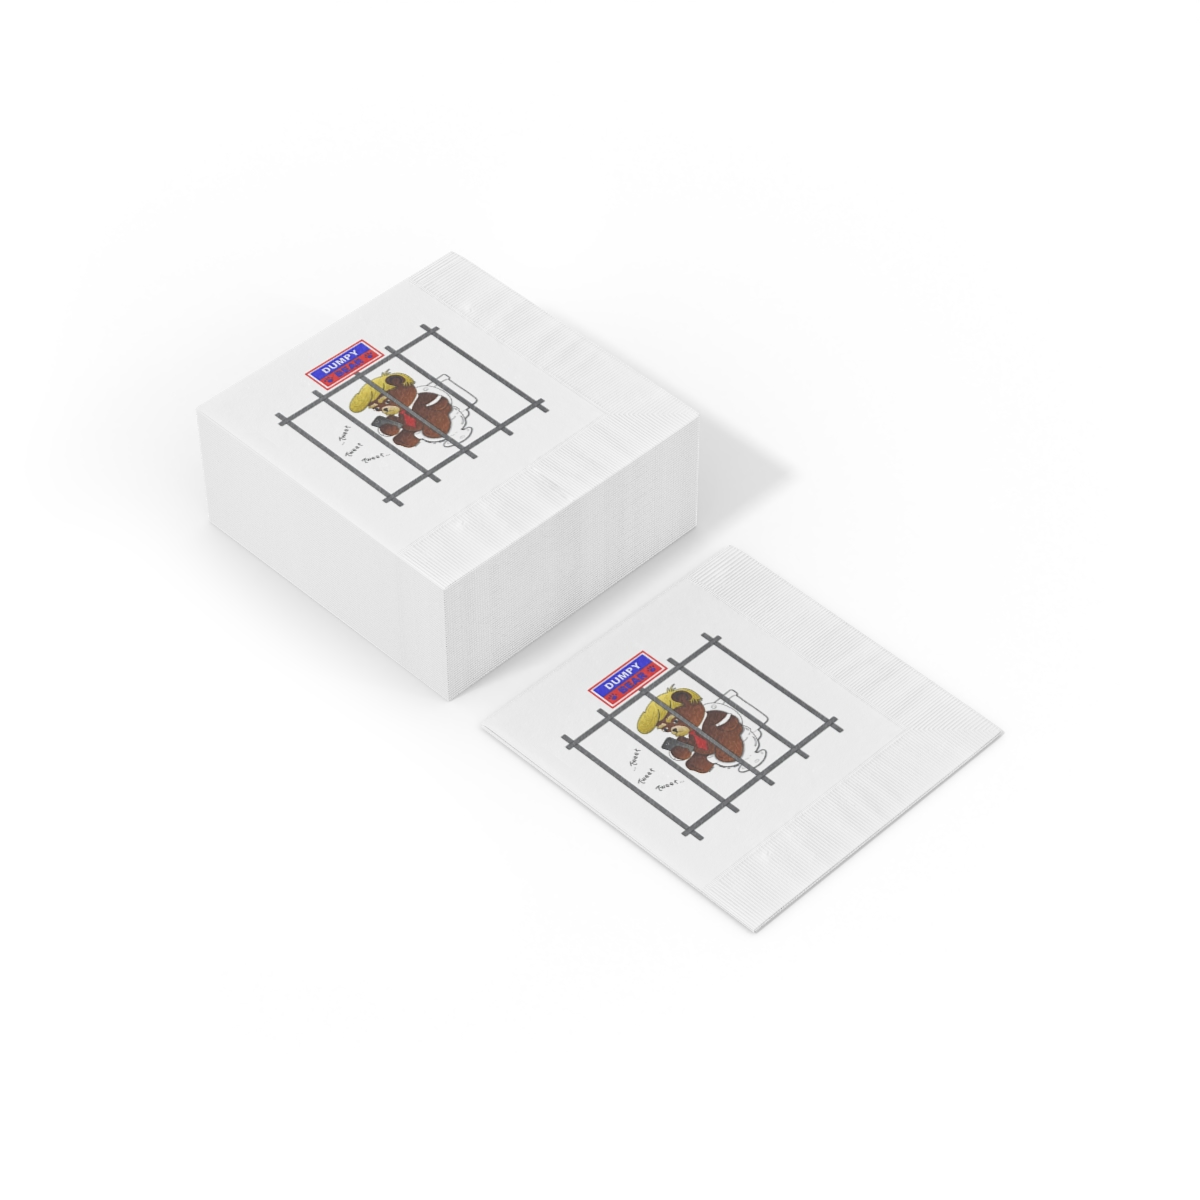 Dumpy Bear Tweeting on Toilet Behind Bars - White Coined Napkins product thumbnail image